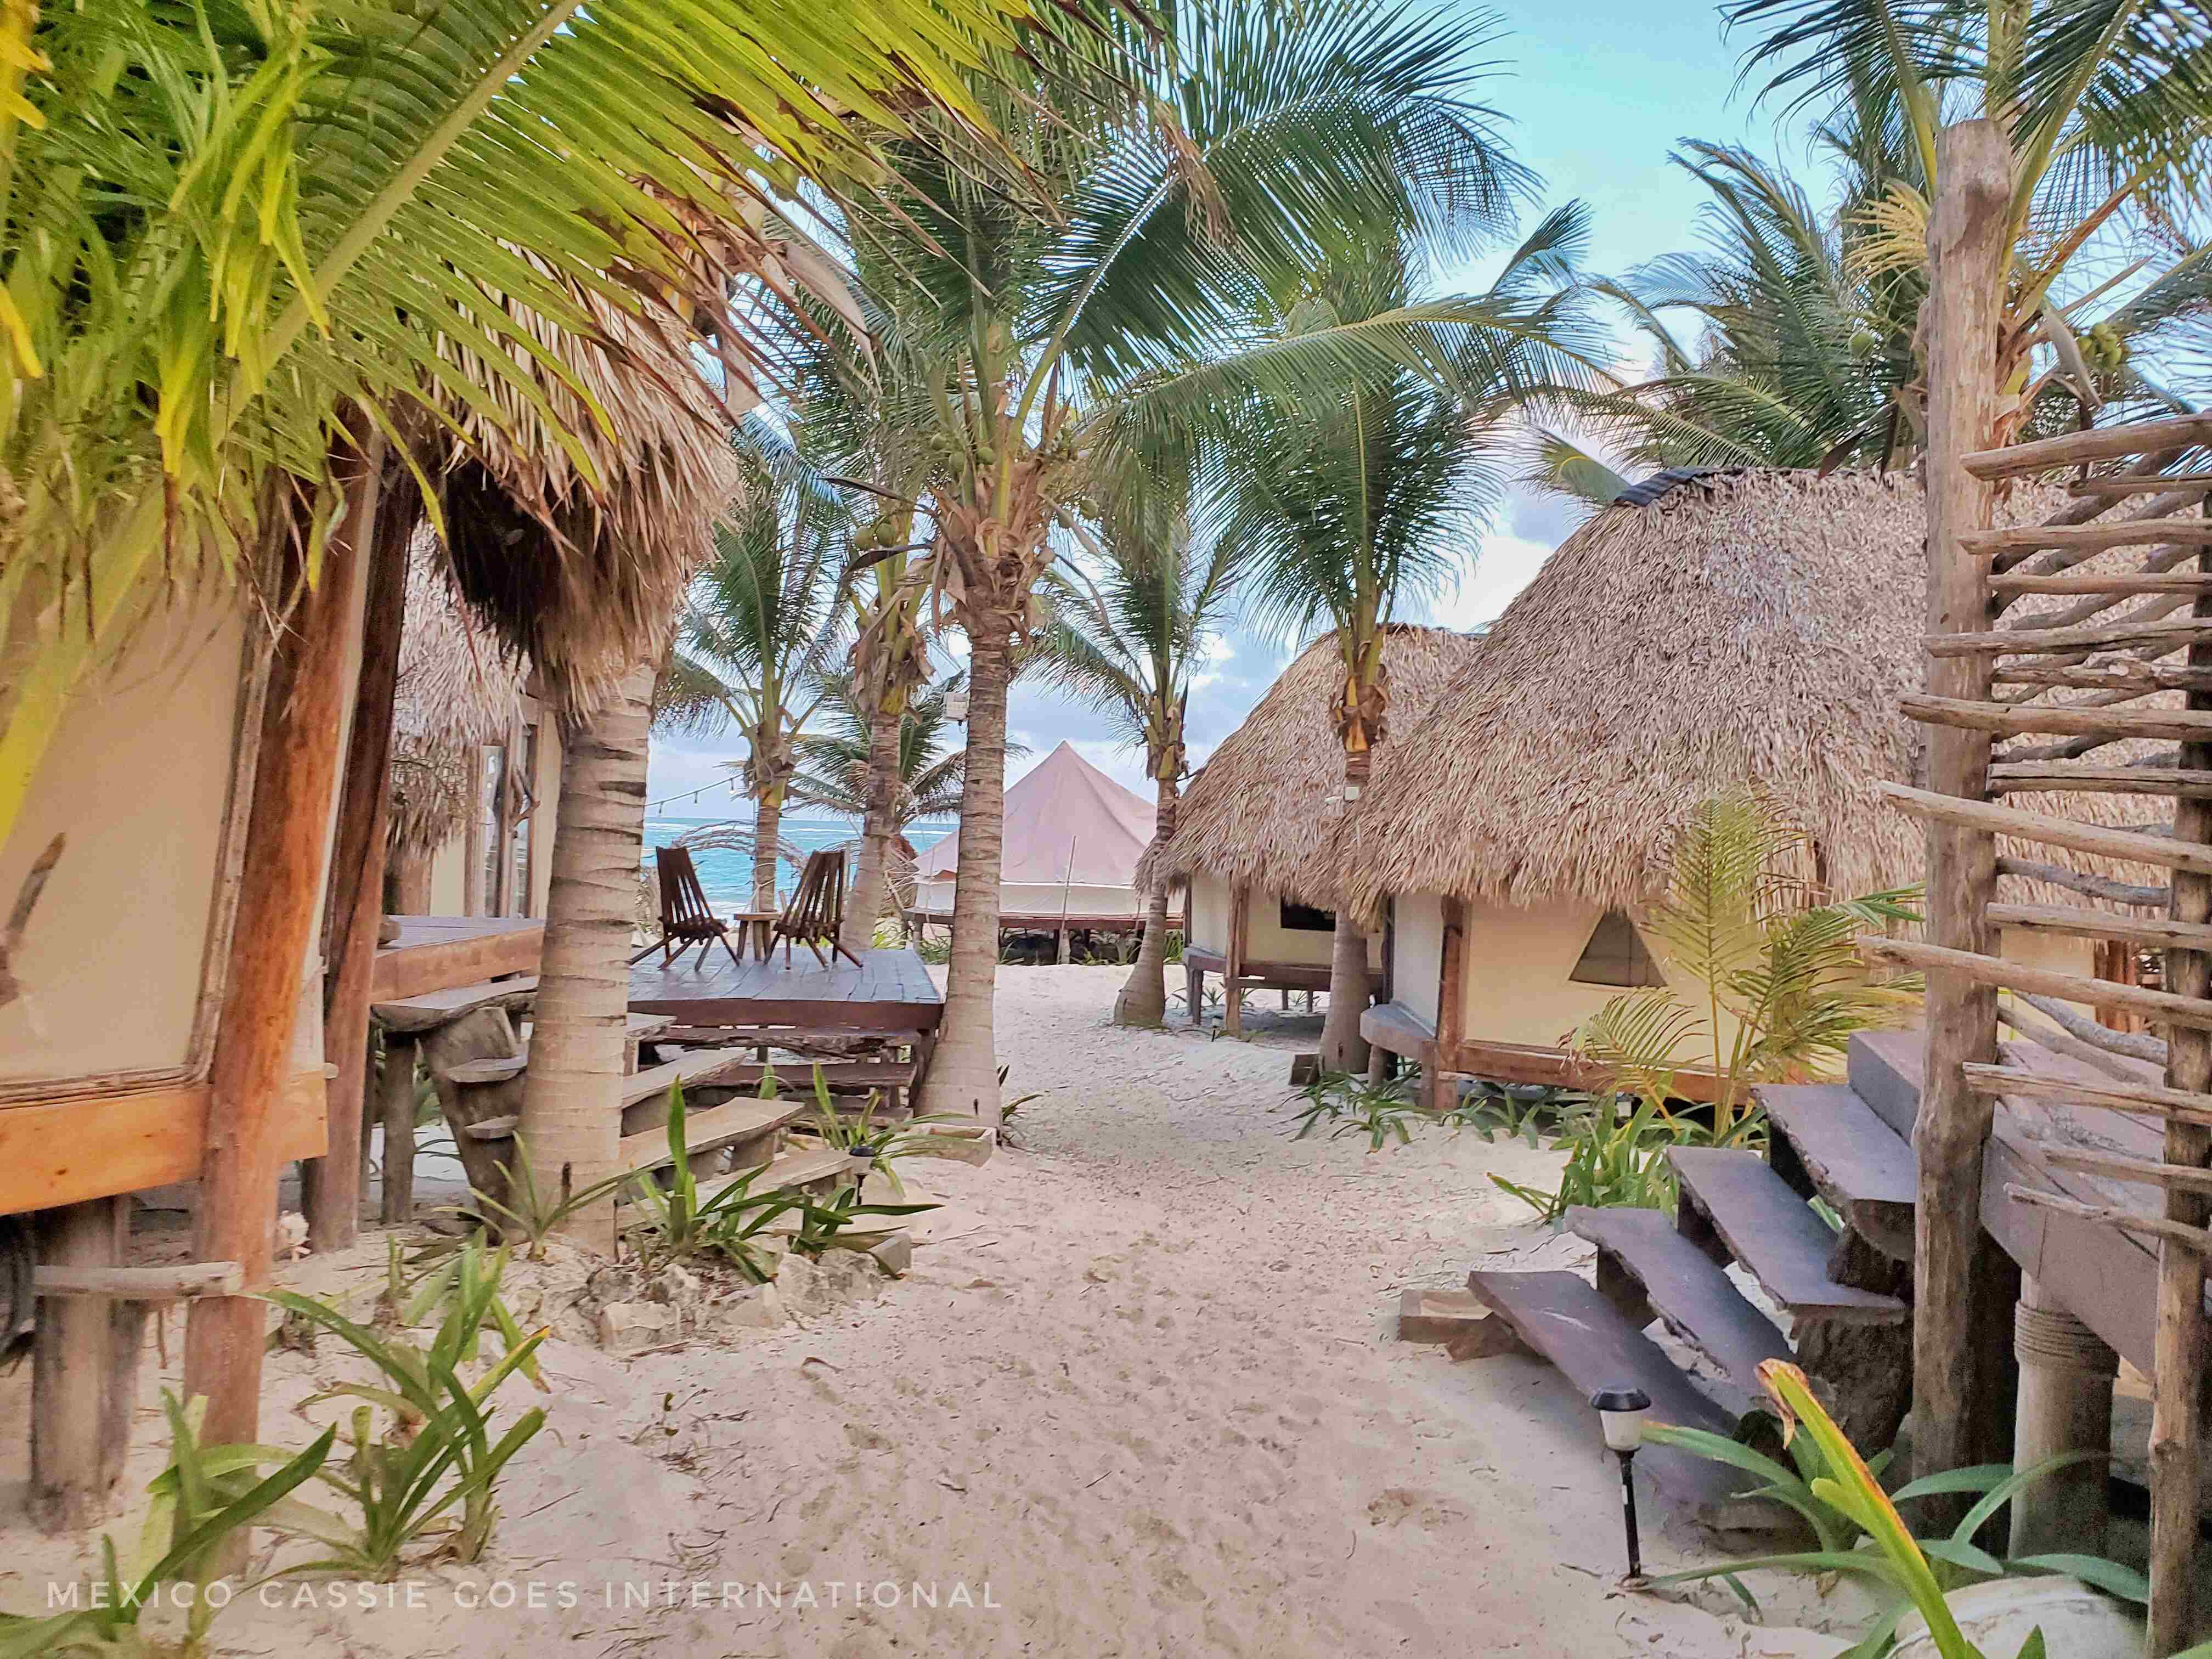 sand path lined with palm trees and thatched huts